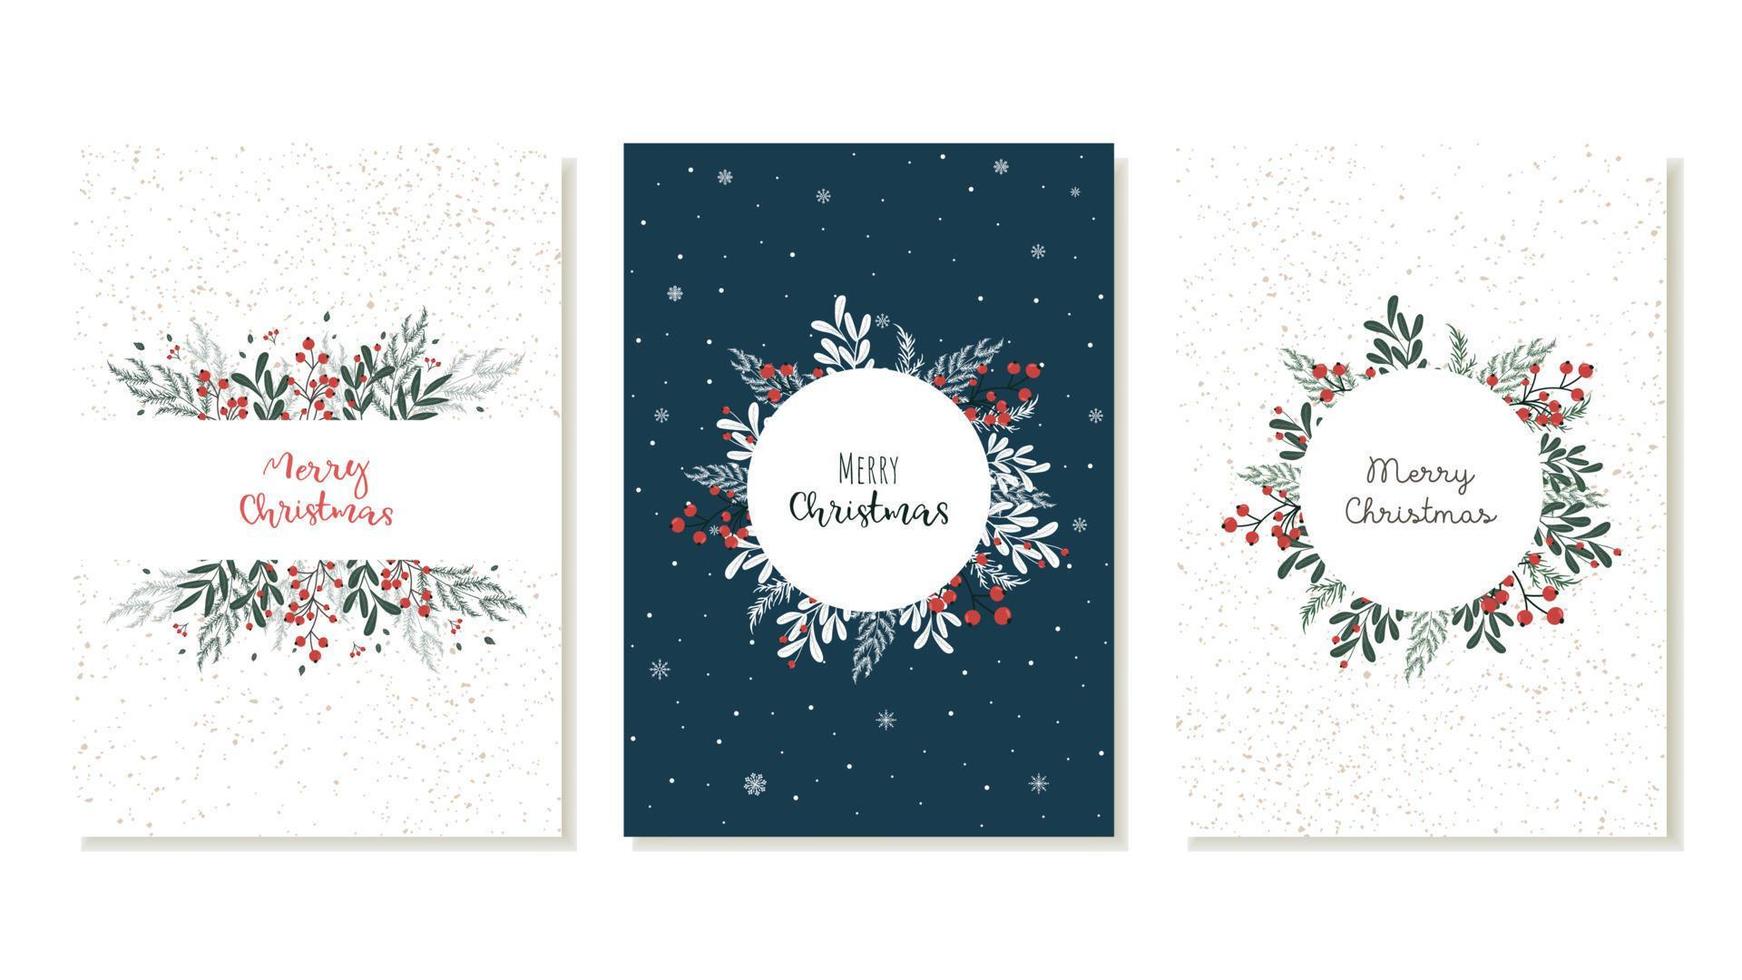 A set of Christmas cards for greeting the New Year with a plant decoration of Christmas trees, branches with red berries. Vector